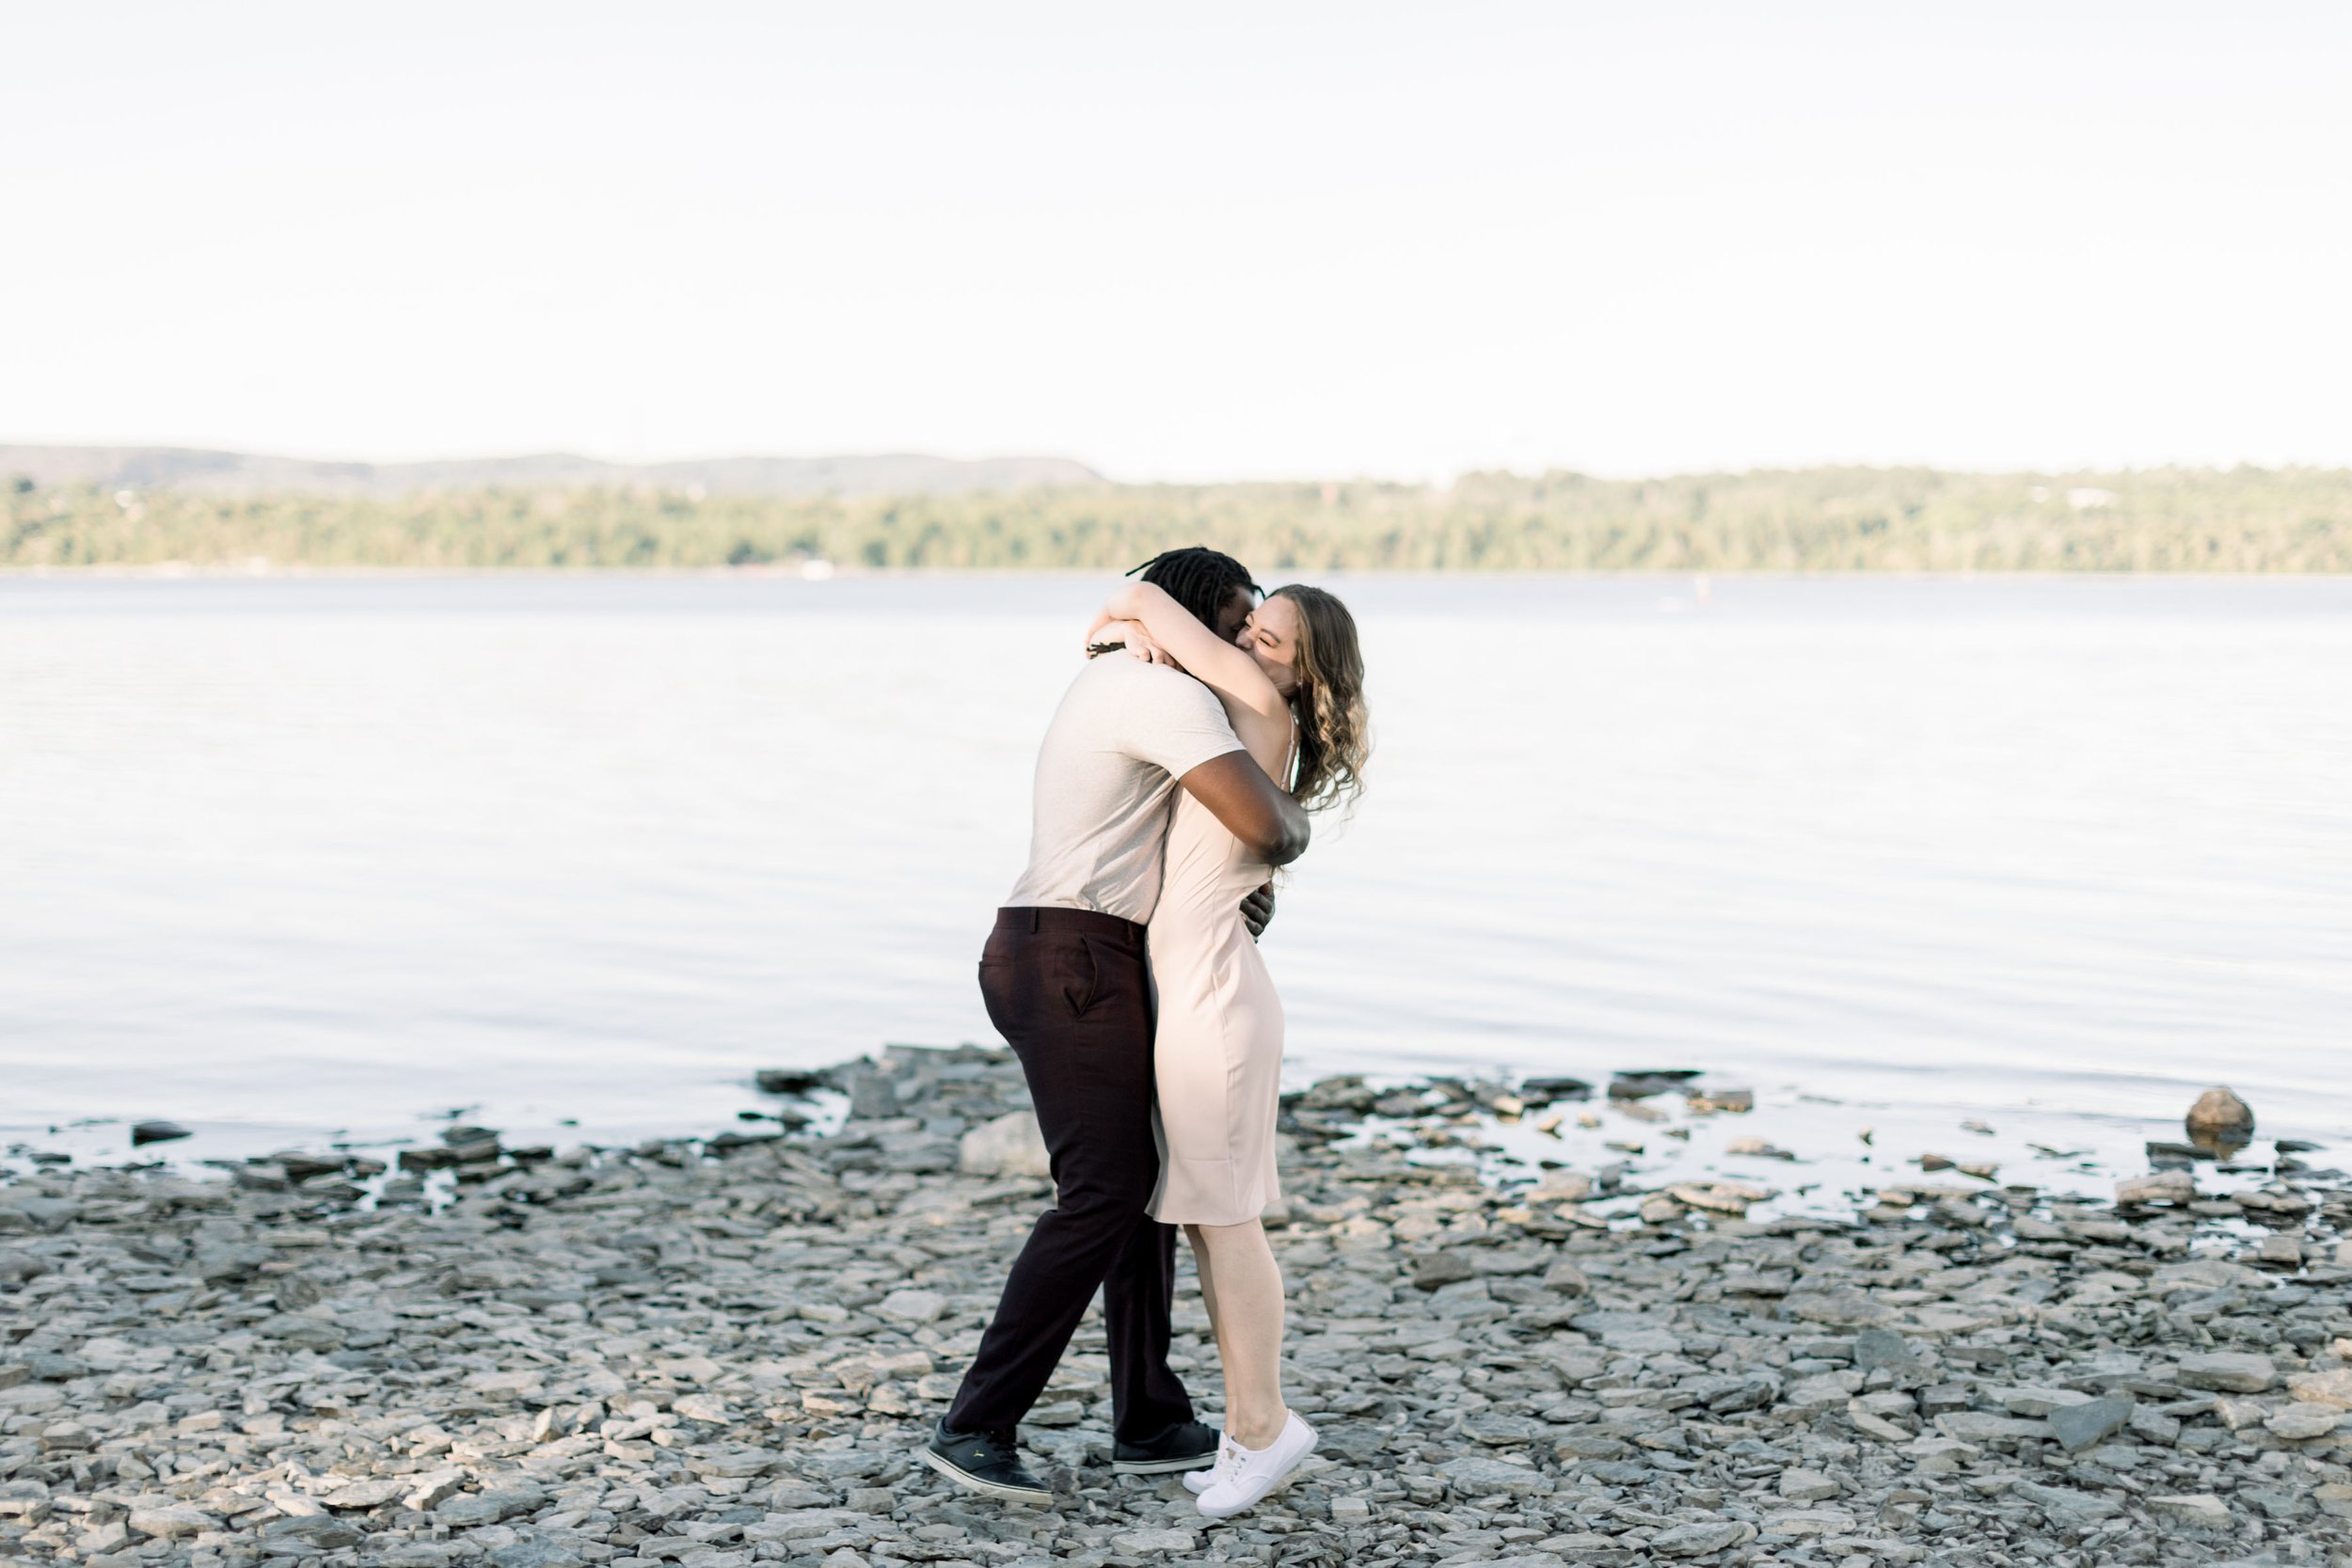  Next to a lake at Pinhey's Point Chelsea Mason Photography capture a newly engaged couple hugging. lake engagement inspiration #Chelseamasonphotography #Chelseamasonengagements #Onatarioengagements #Pinhey'sPoint #Ontarioweddingphotographers 